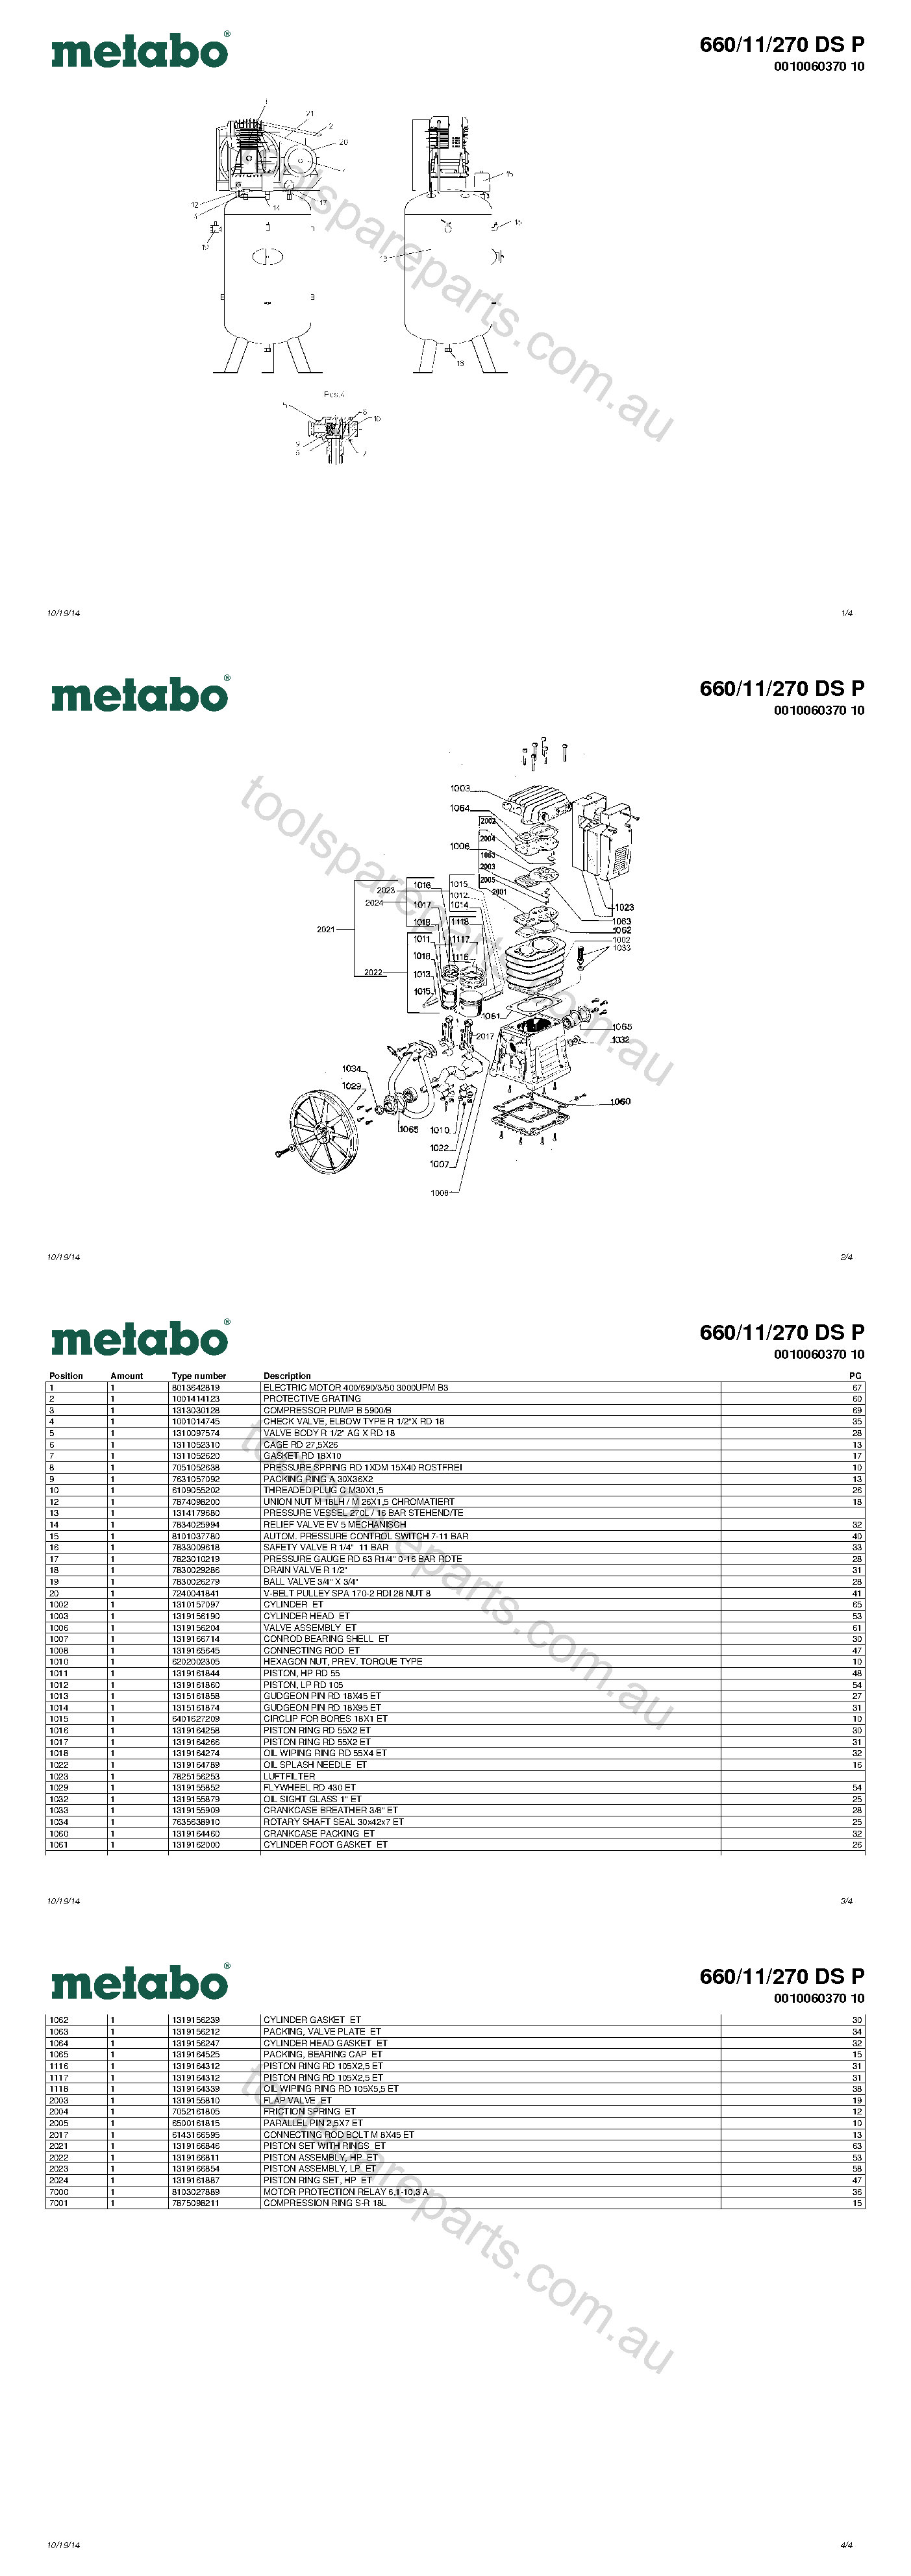 Metabo 660/11/270 DS P 0010060370 10  Diagram 1